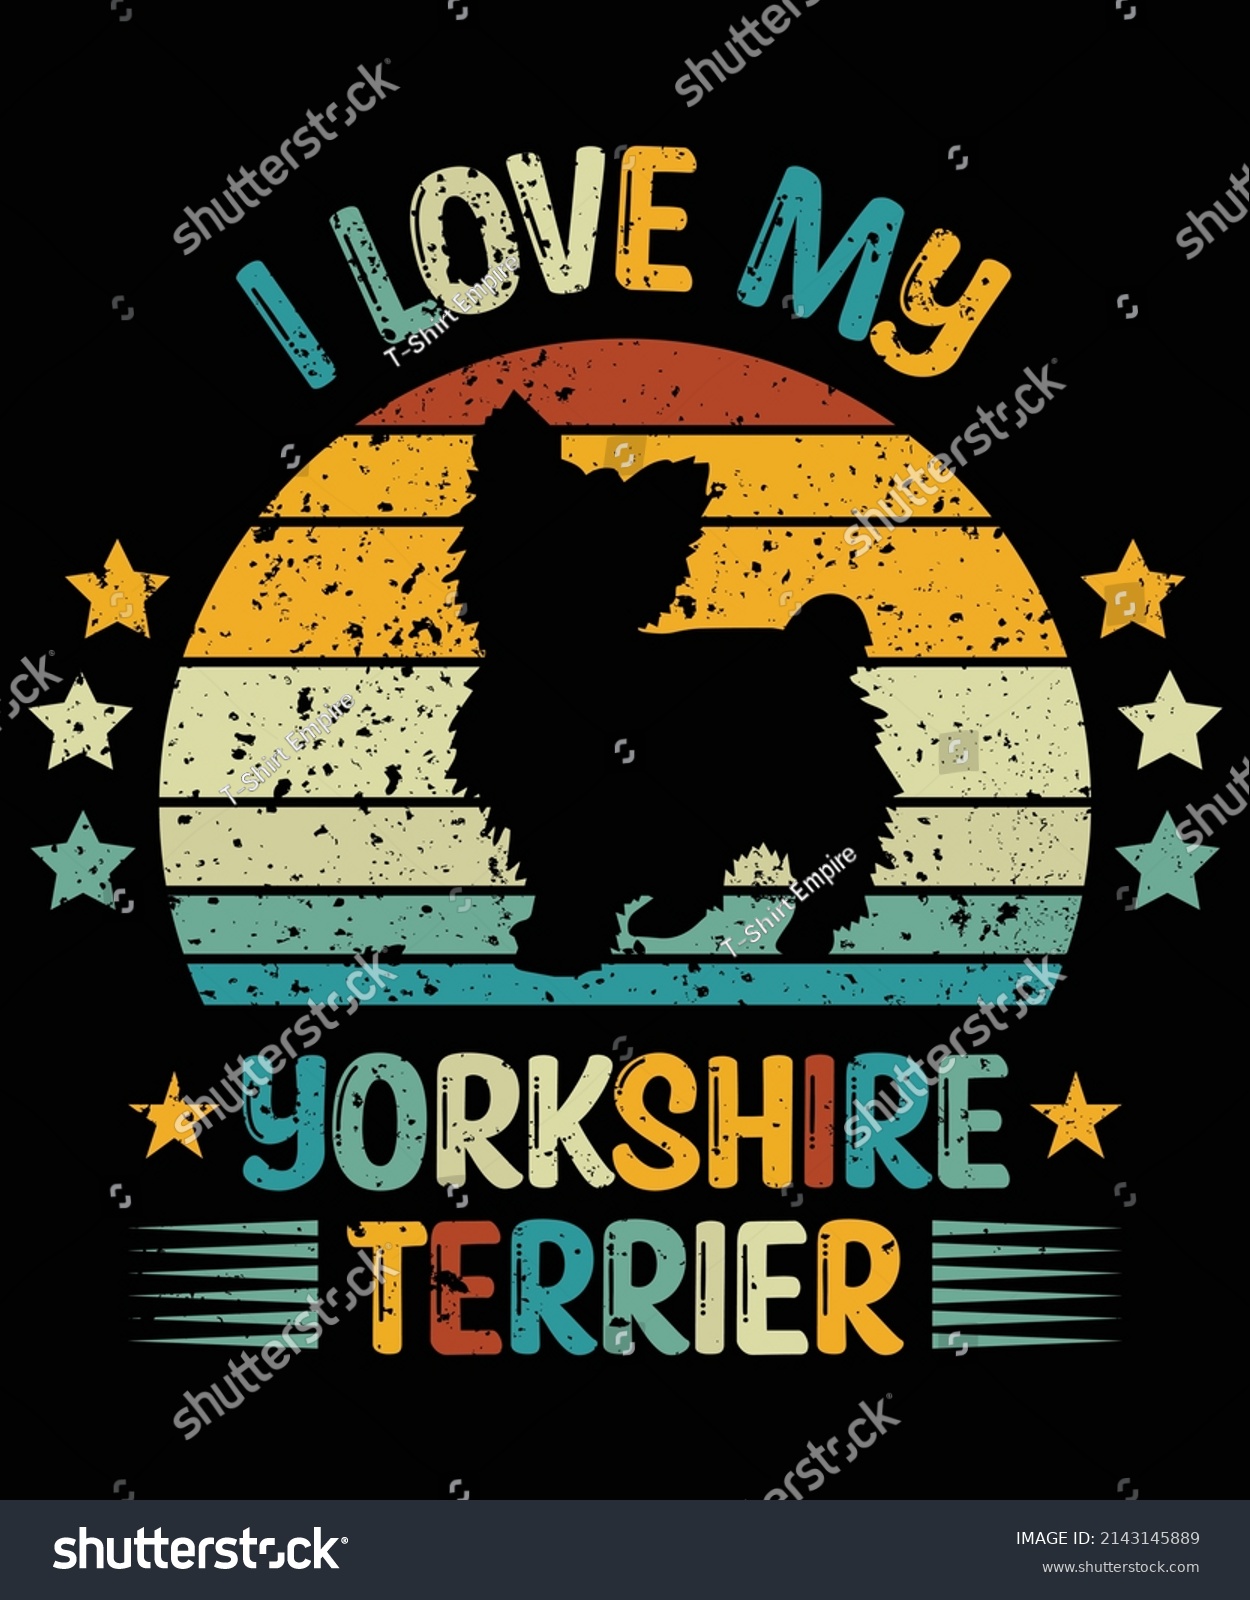 SVG of Yorkshire Terrier silhouette vintage and retro t-shirt design svg